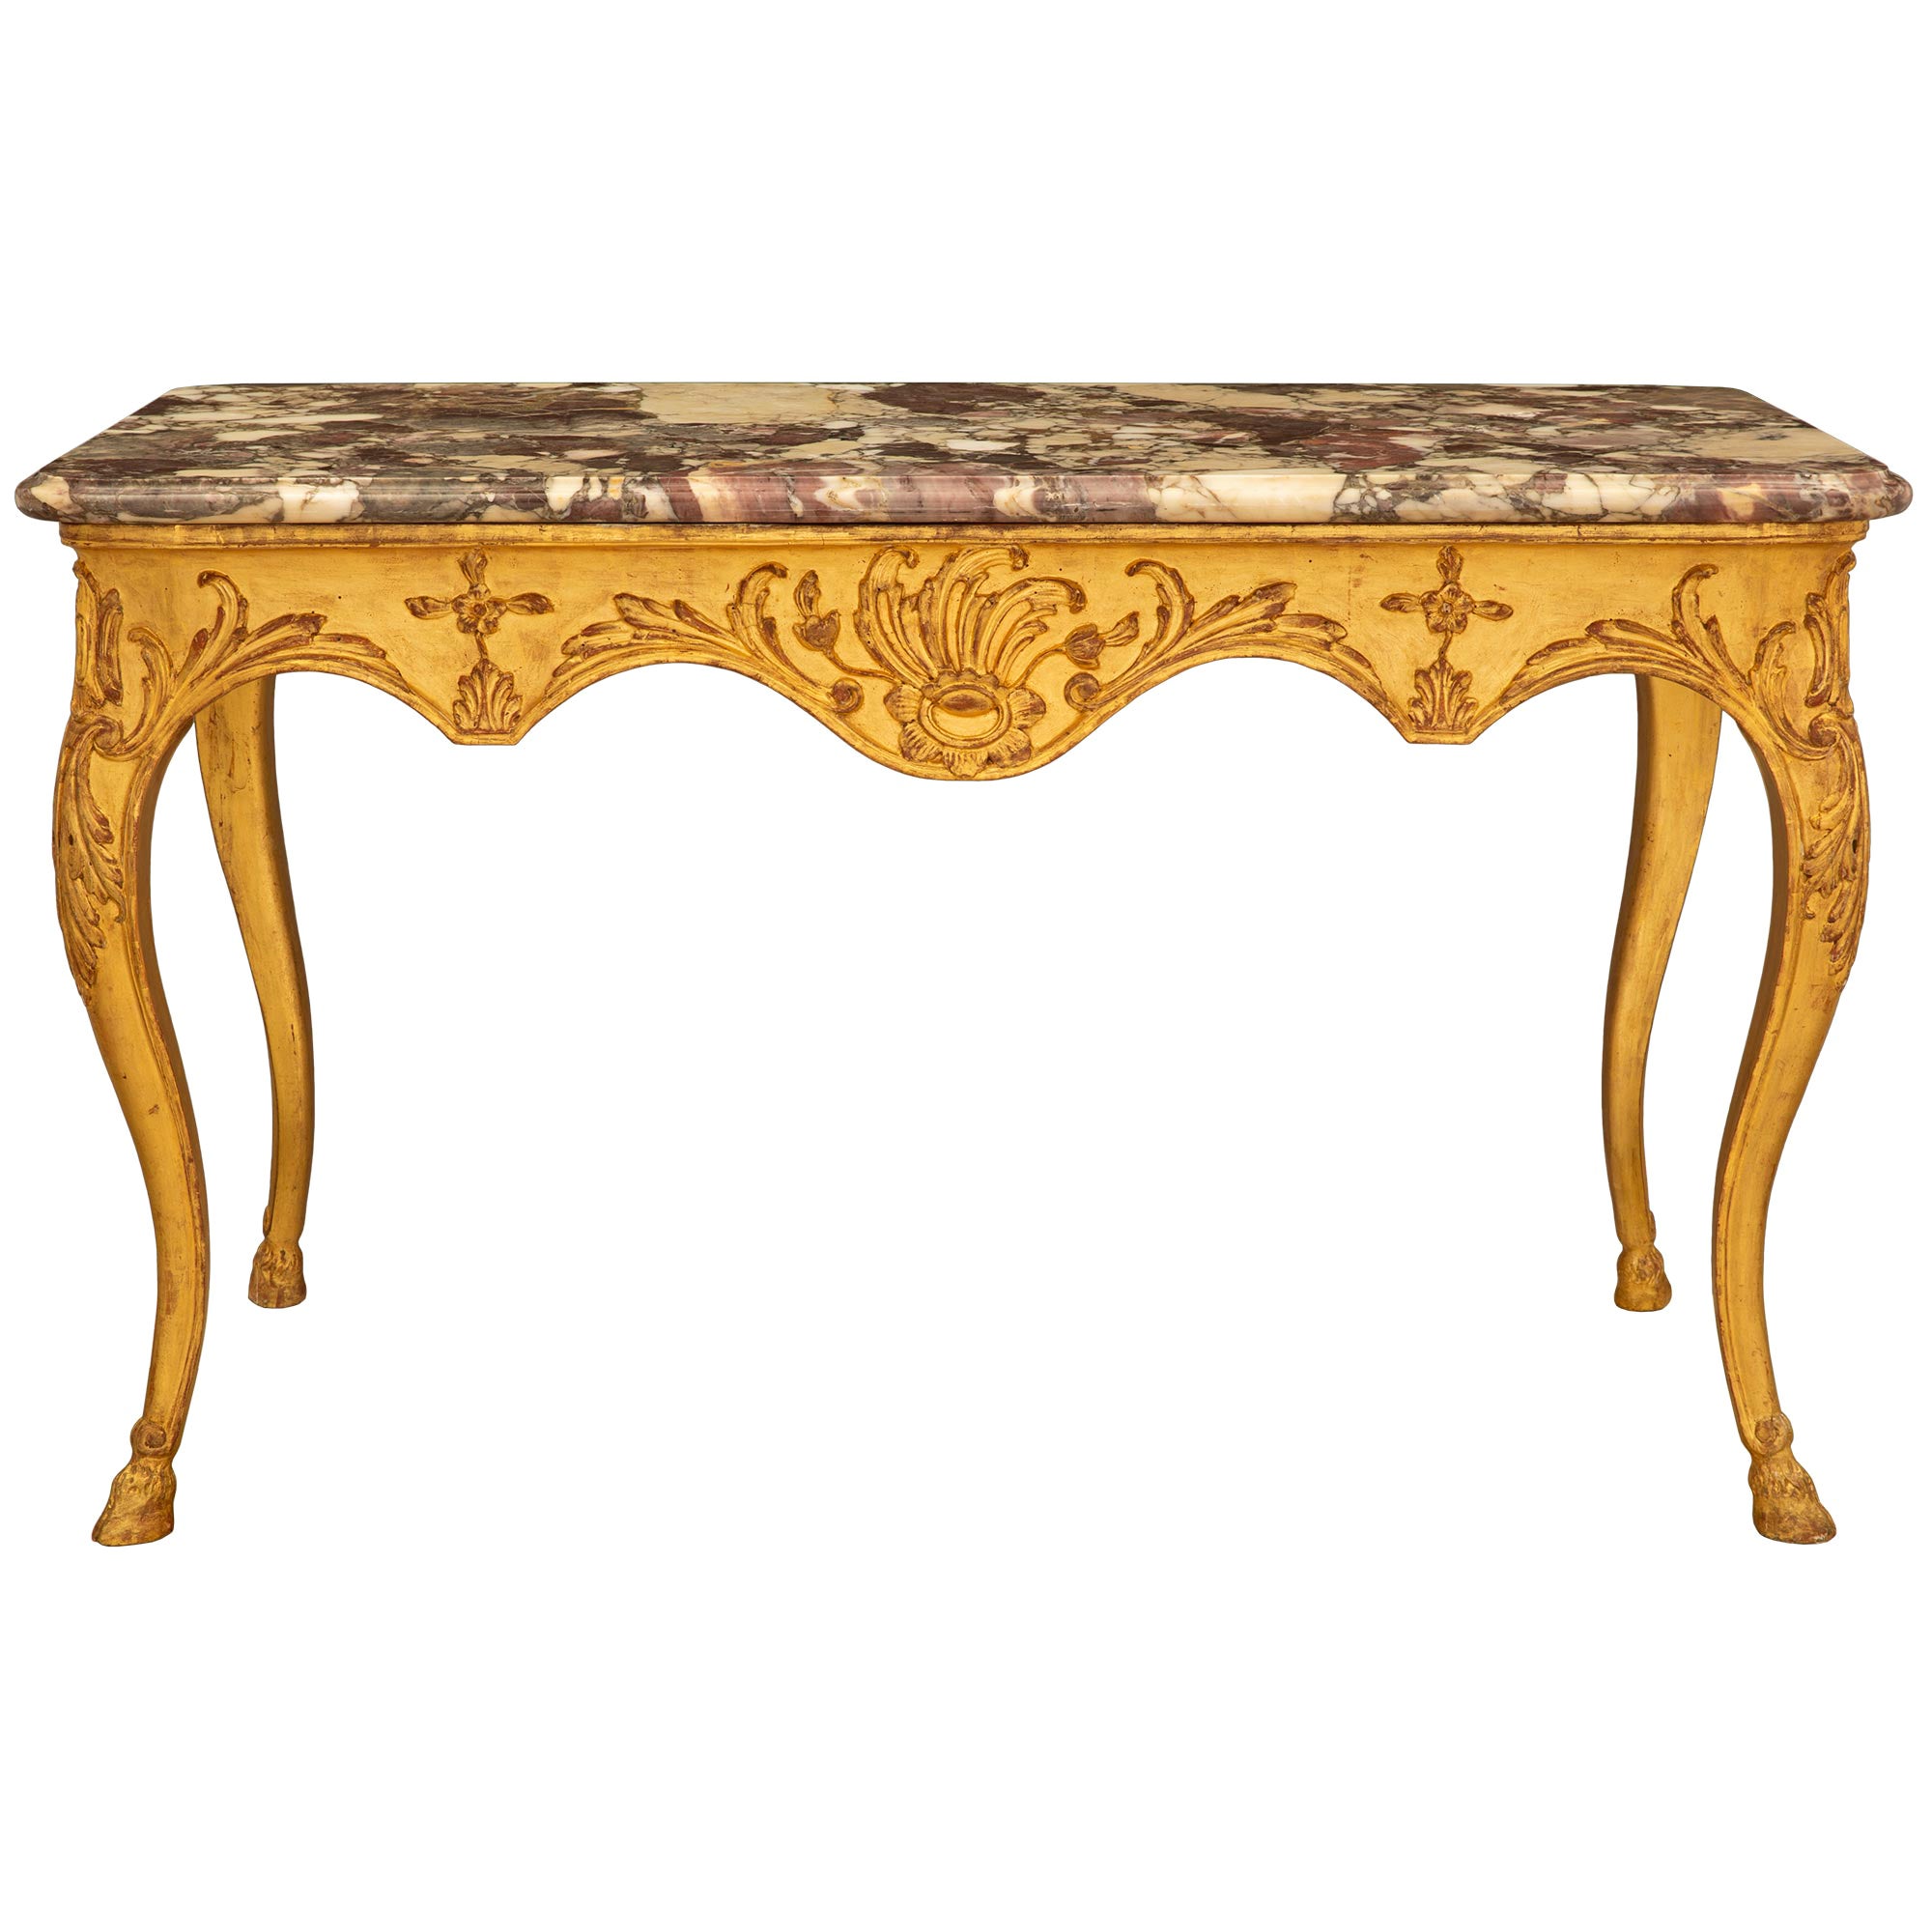 Italian Mid-18th Century Louis XV Period Giltwood and Marble Center Table For Sale